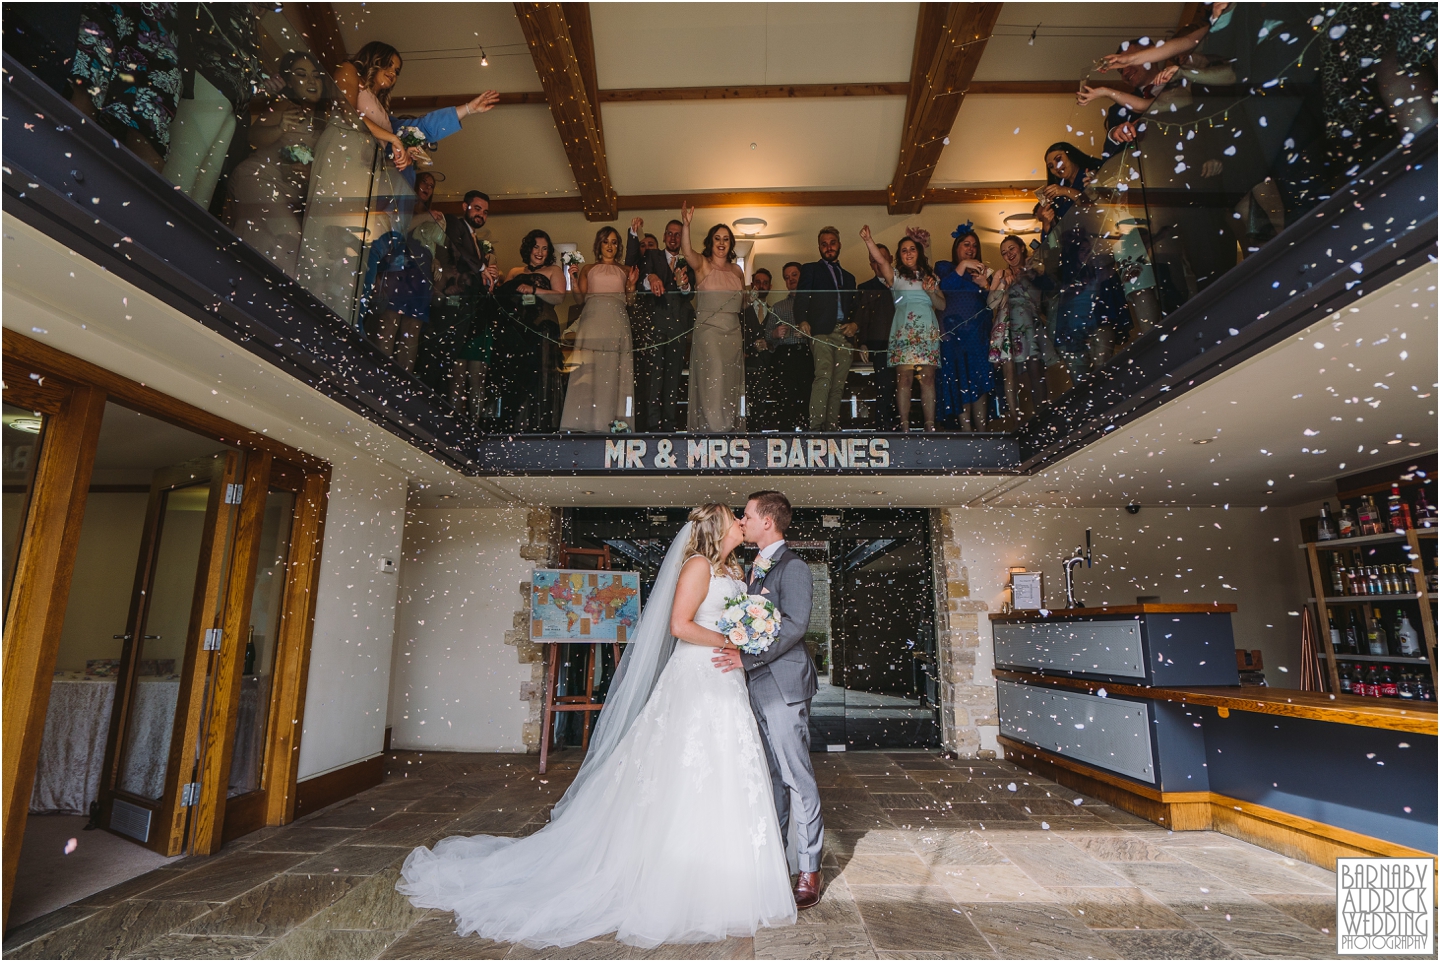 Confetti photograph at Priory Cottages Wedding Barn in Syningthwaite Priory, Wedding photography at St Peter's Church Walton near Wetherby, Priory Cottages Barn Wedding Venue Photos, Yorkshire Barn Venue Photos